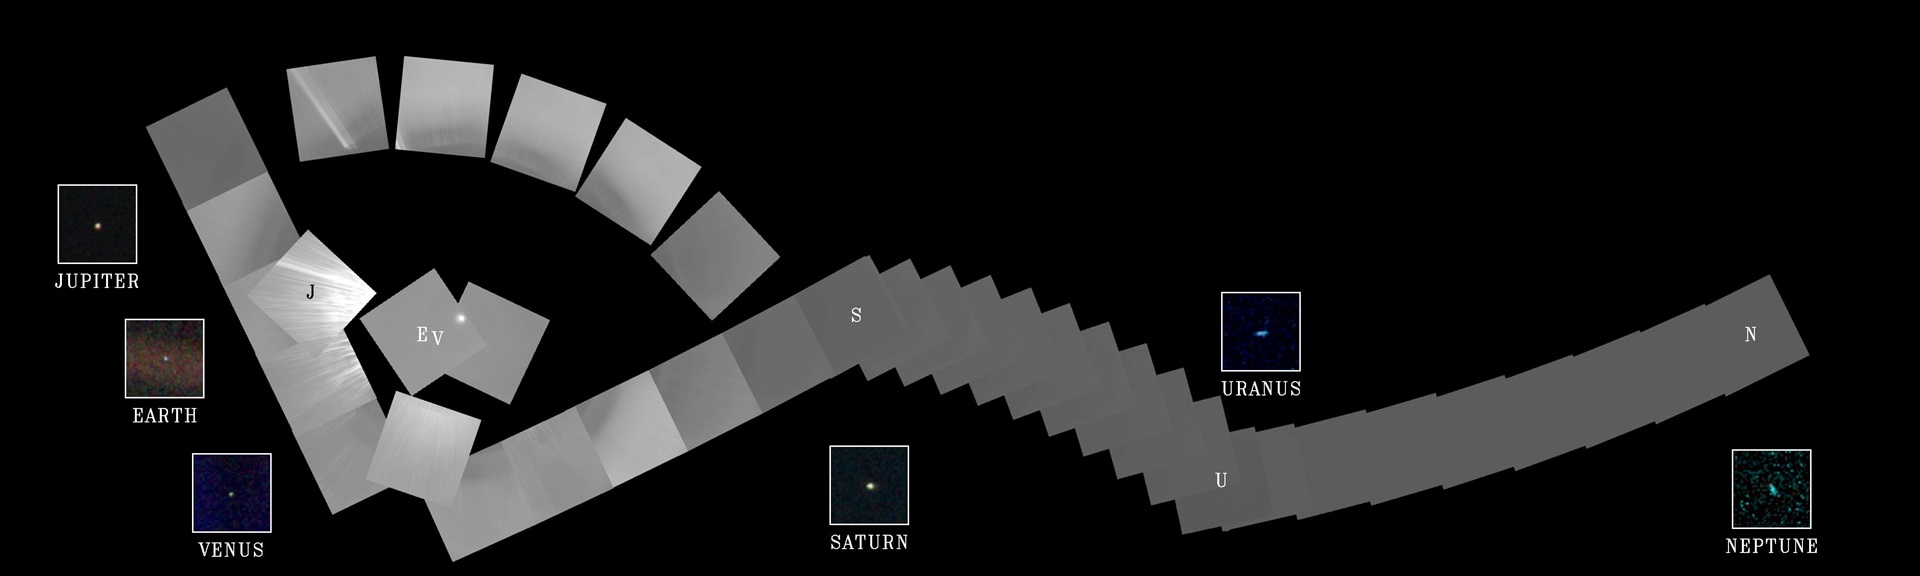 The solar system's portrait was provided by Voyager 1 in 1990. NASA/JPL